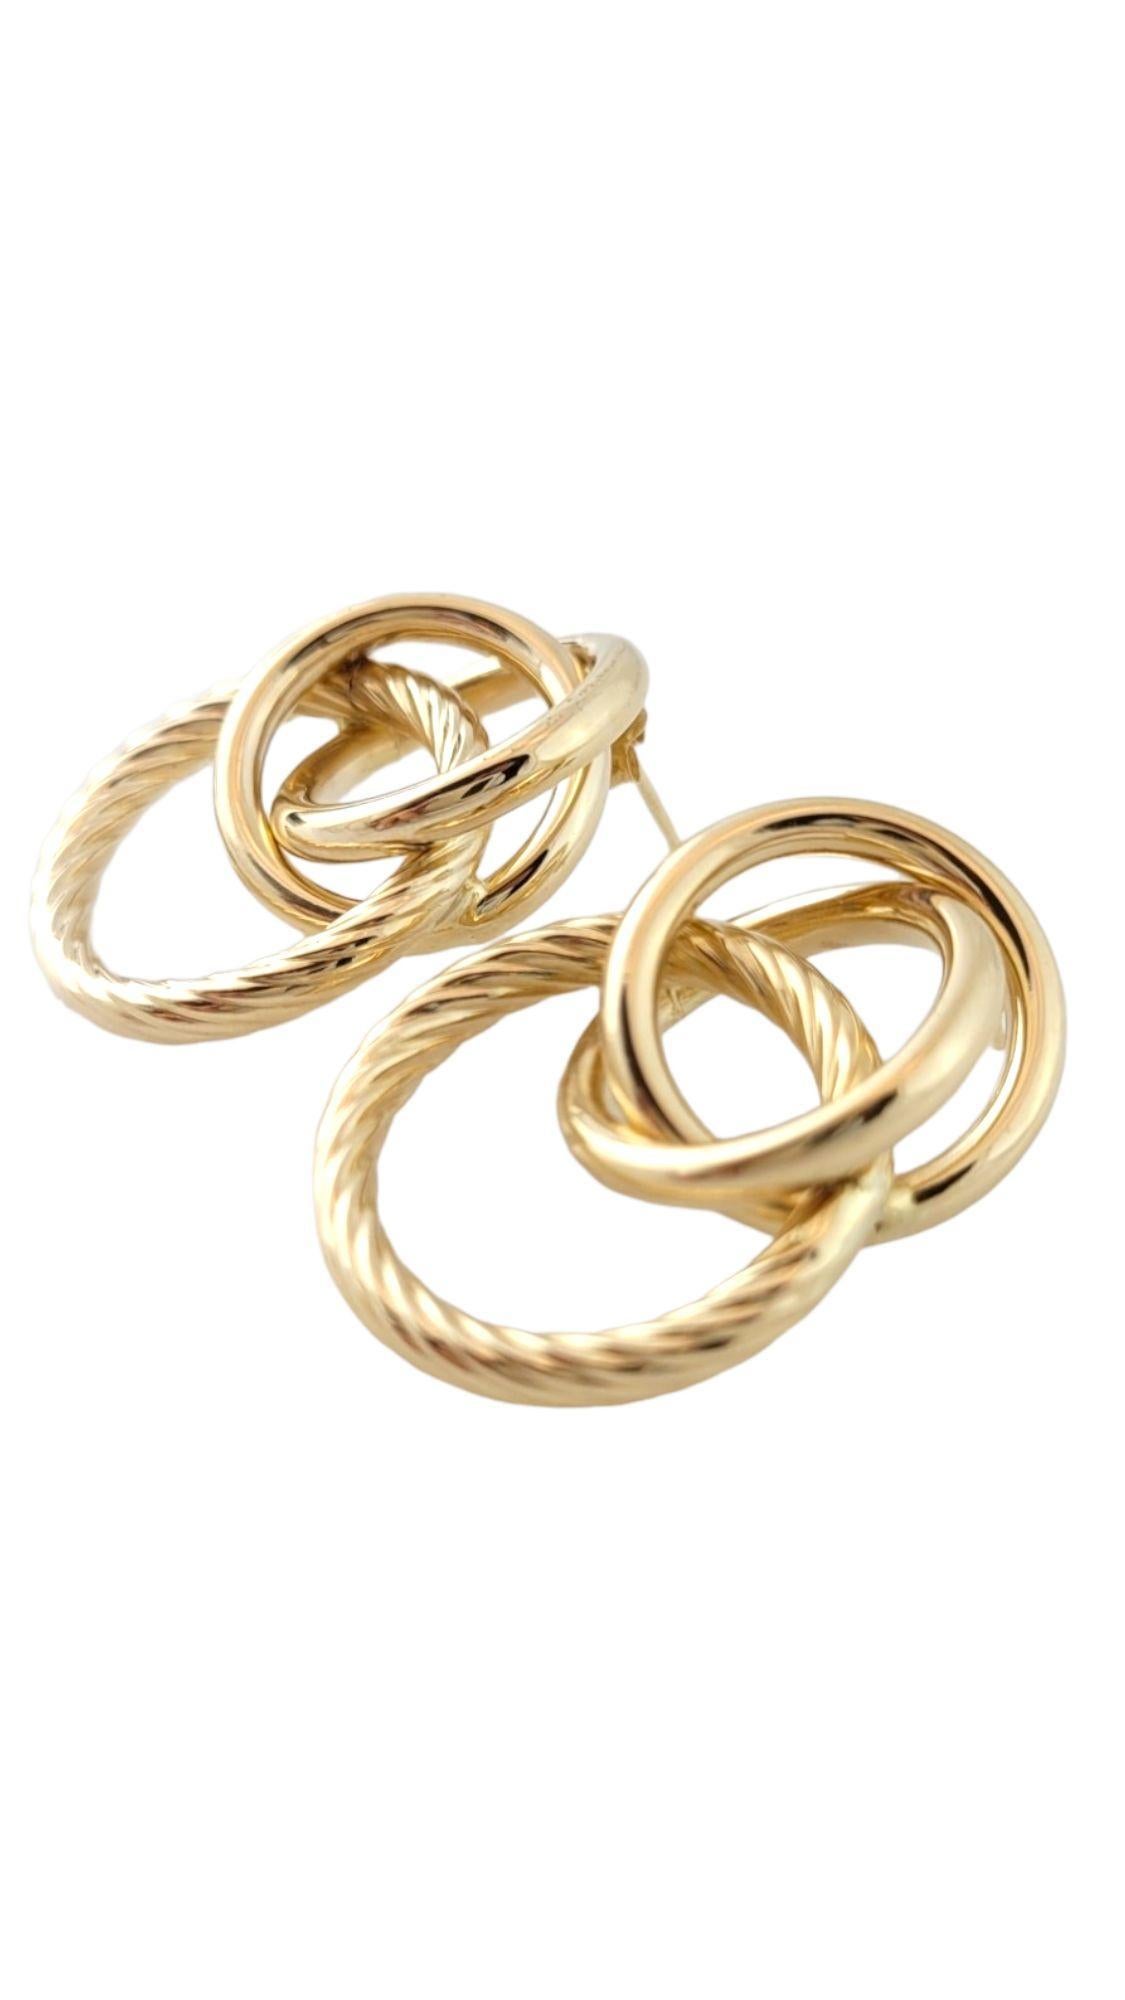 Vintage 14K Yellow Gold Triple Twisted Circle Drop Earrings

This beautiful set of triple twisted circle earrings are crafted from 14K yellow gold!

Size: 29.9mm X 21.8mm X 8.9mm

Weight: 5.06 g/ 3.3 dwt

Hallmark: 14K

Very good condition,